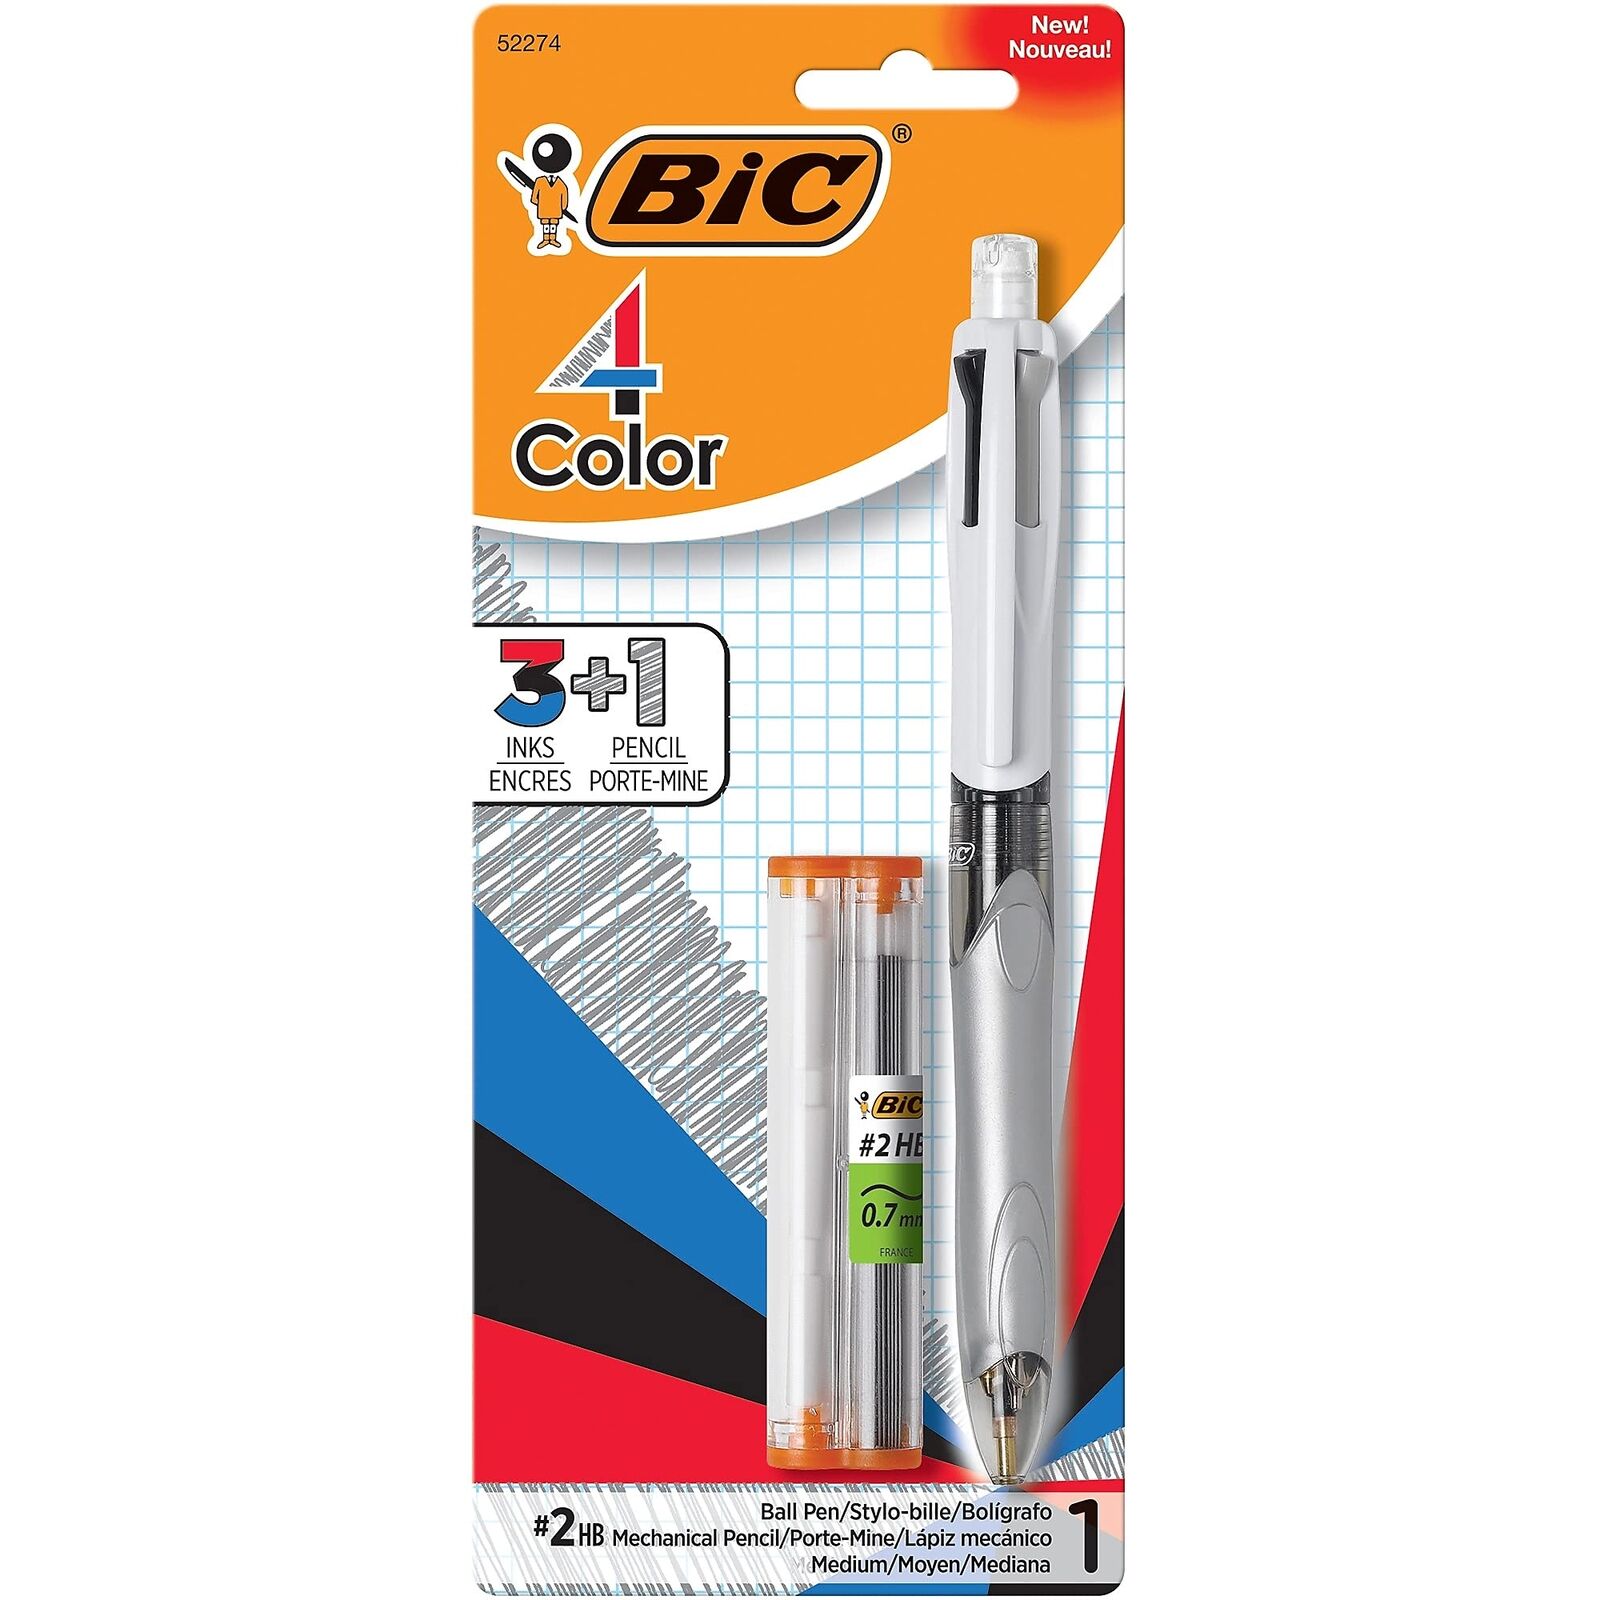 Bic 4-Color 3+1 Medium Point Ball Pen/0.7Mm Lead 1-Pack Blister Wholesale in pck